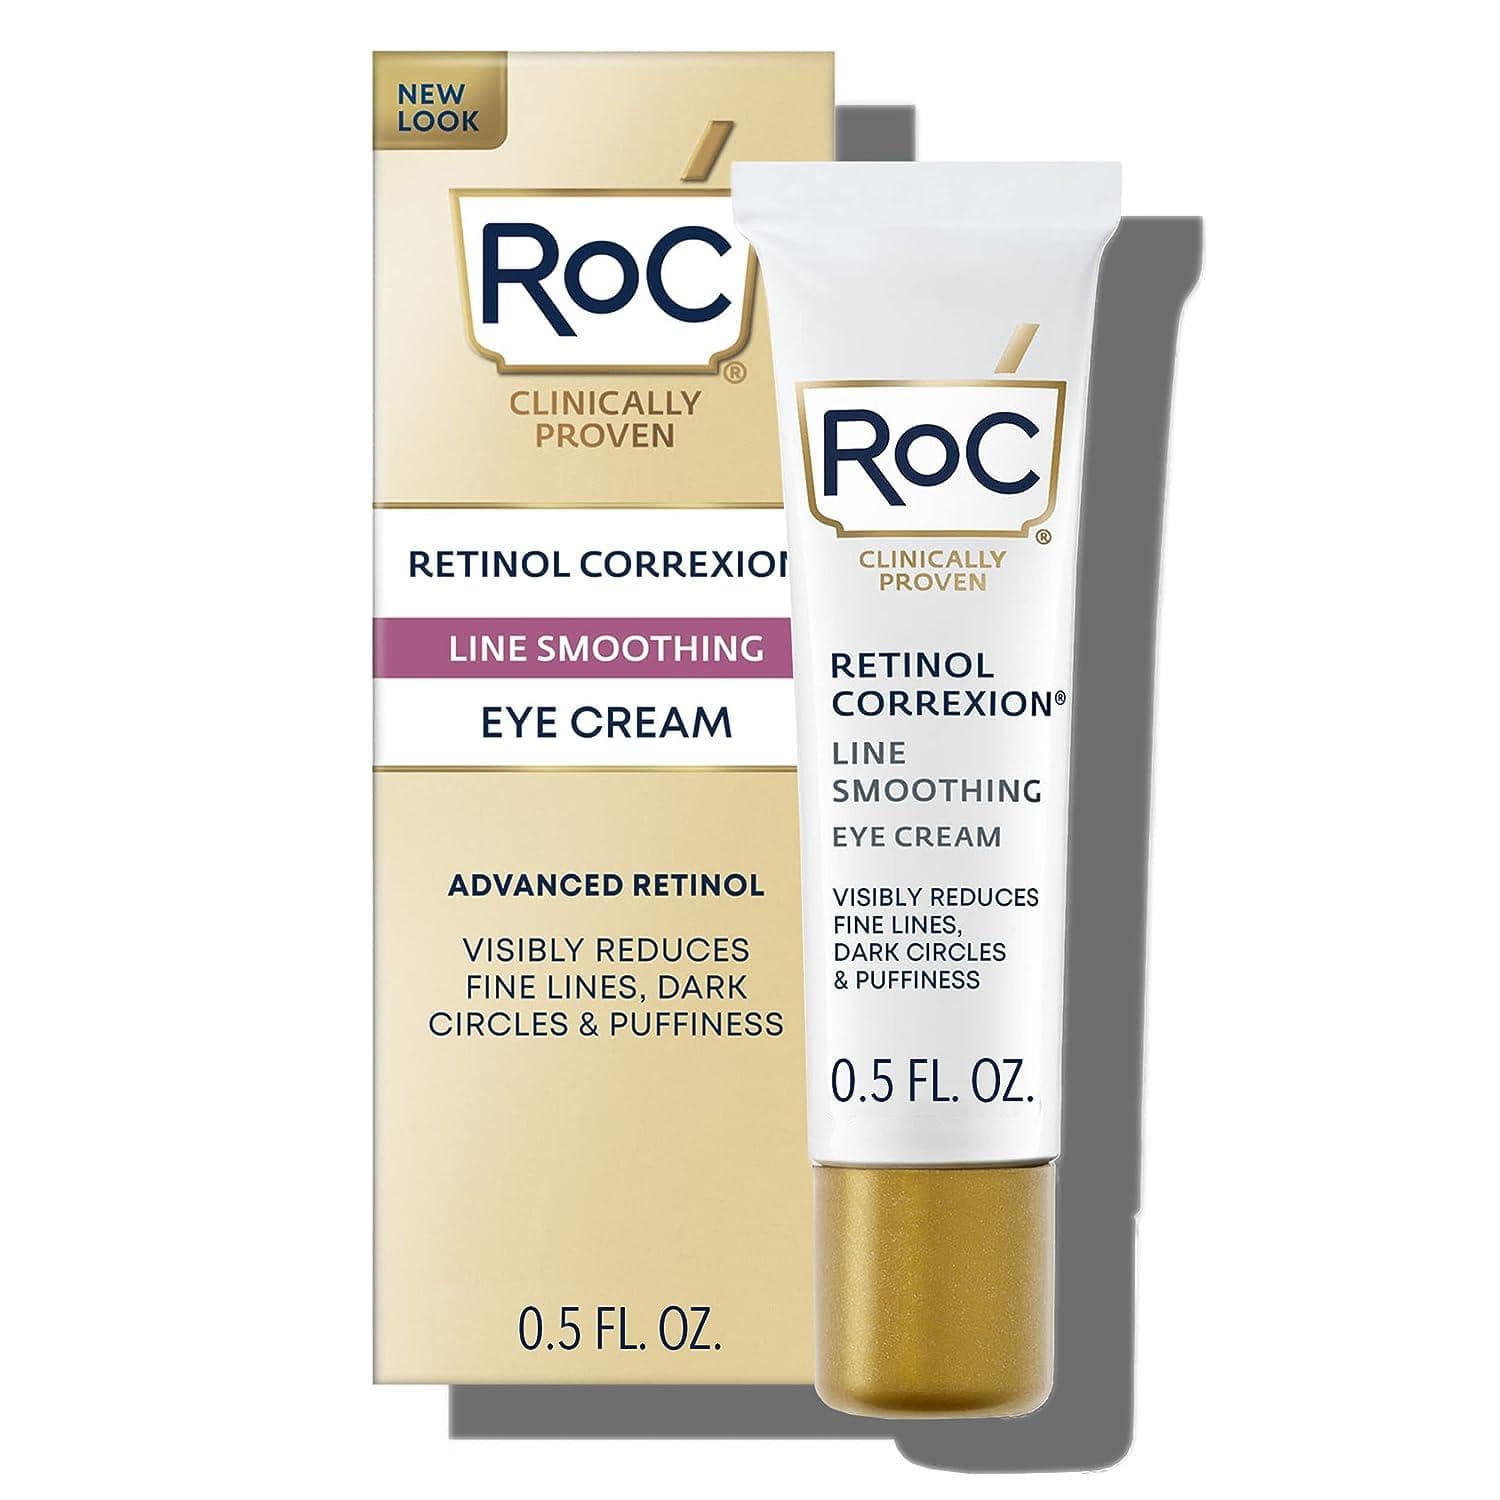 a hypoallergenic eye creams targeting puffiness, dark circles, and fine lines. Pure retinol ensures effective anti-aging benefits. Safe for all skin types, gradually use three times a week to avoid sensitivity. Witness visible refreshment after about a month of consistent use.
